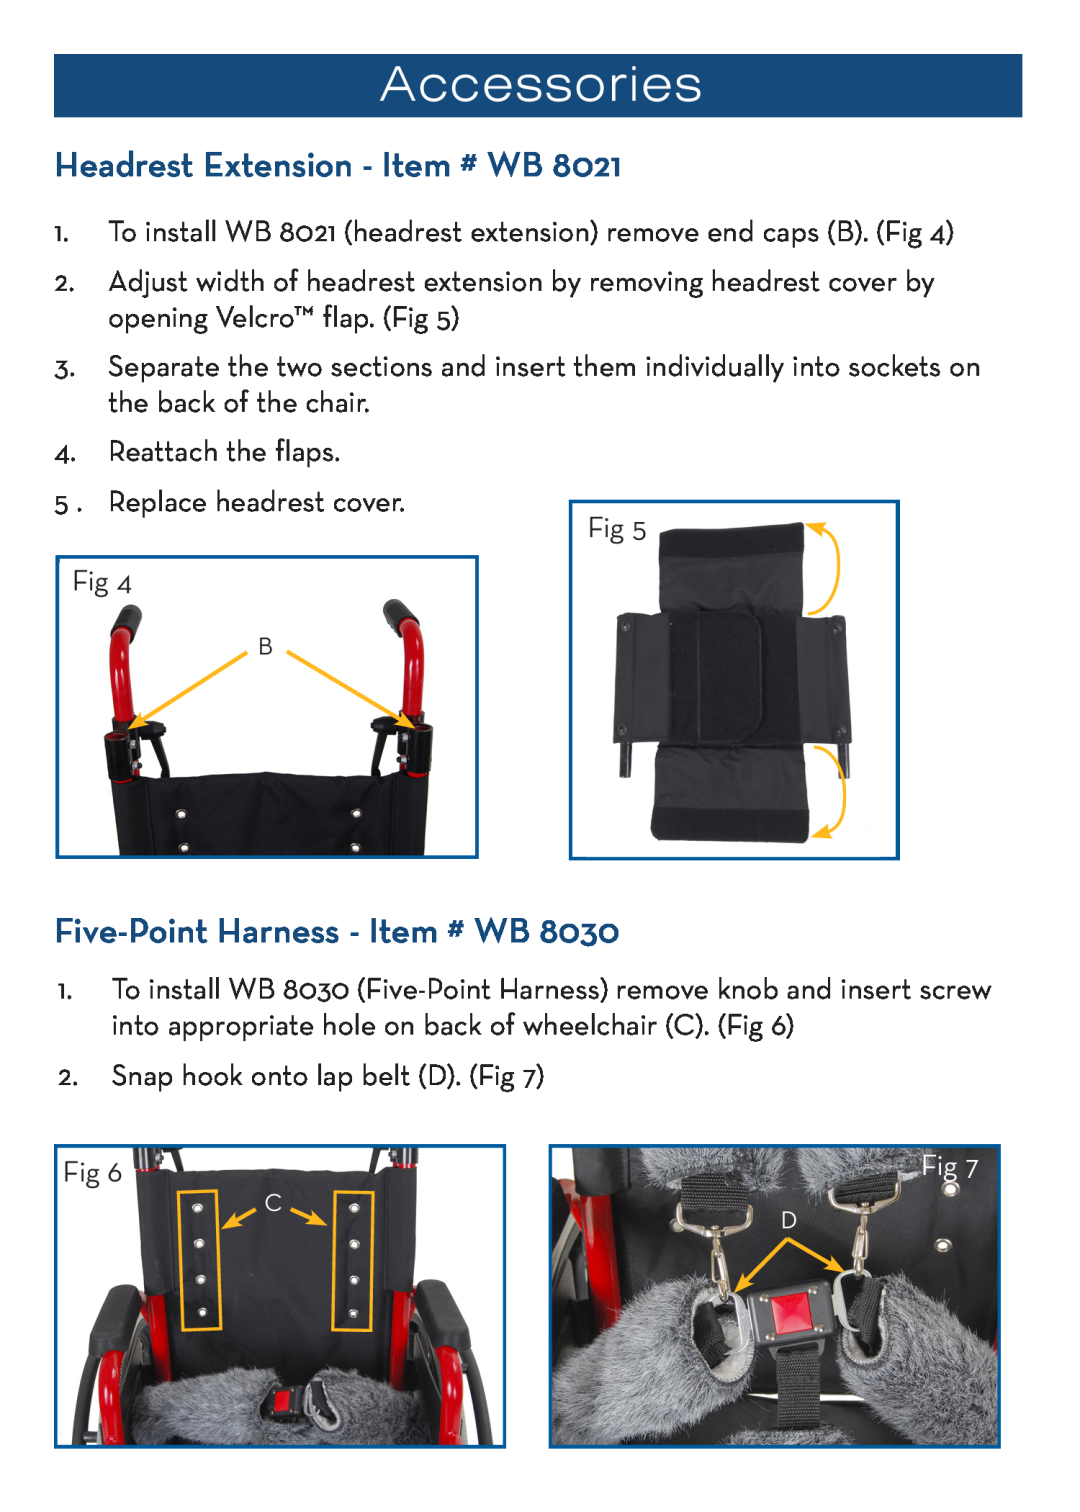 Drive Medical Design wb 1200, wb 1400 manual Accessories, Headrest Extension - Item # WB, Five-Point Harness - Item # WB 